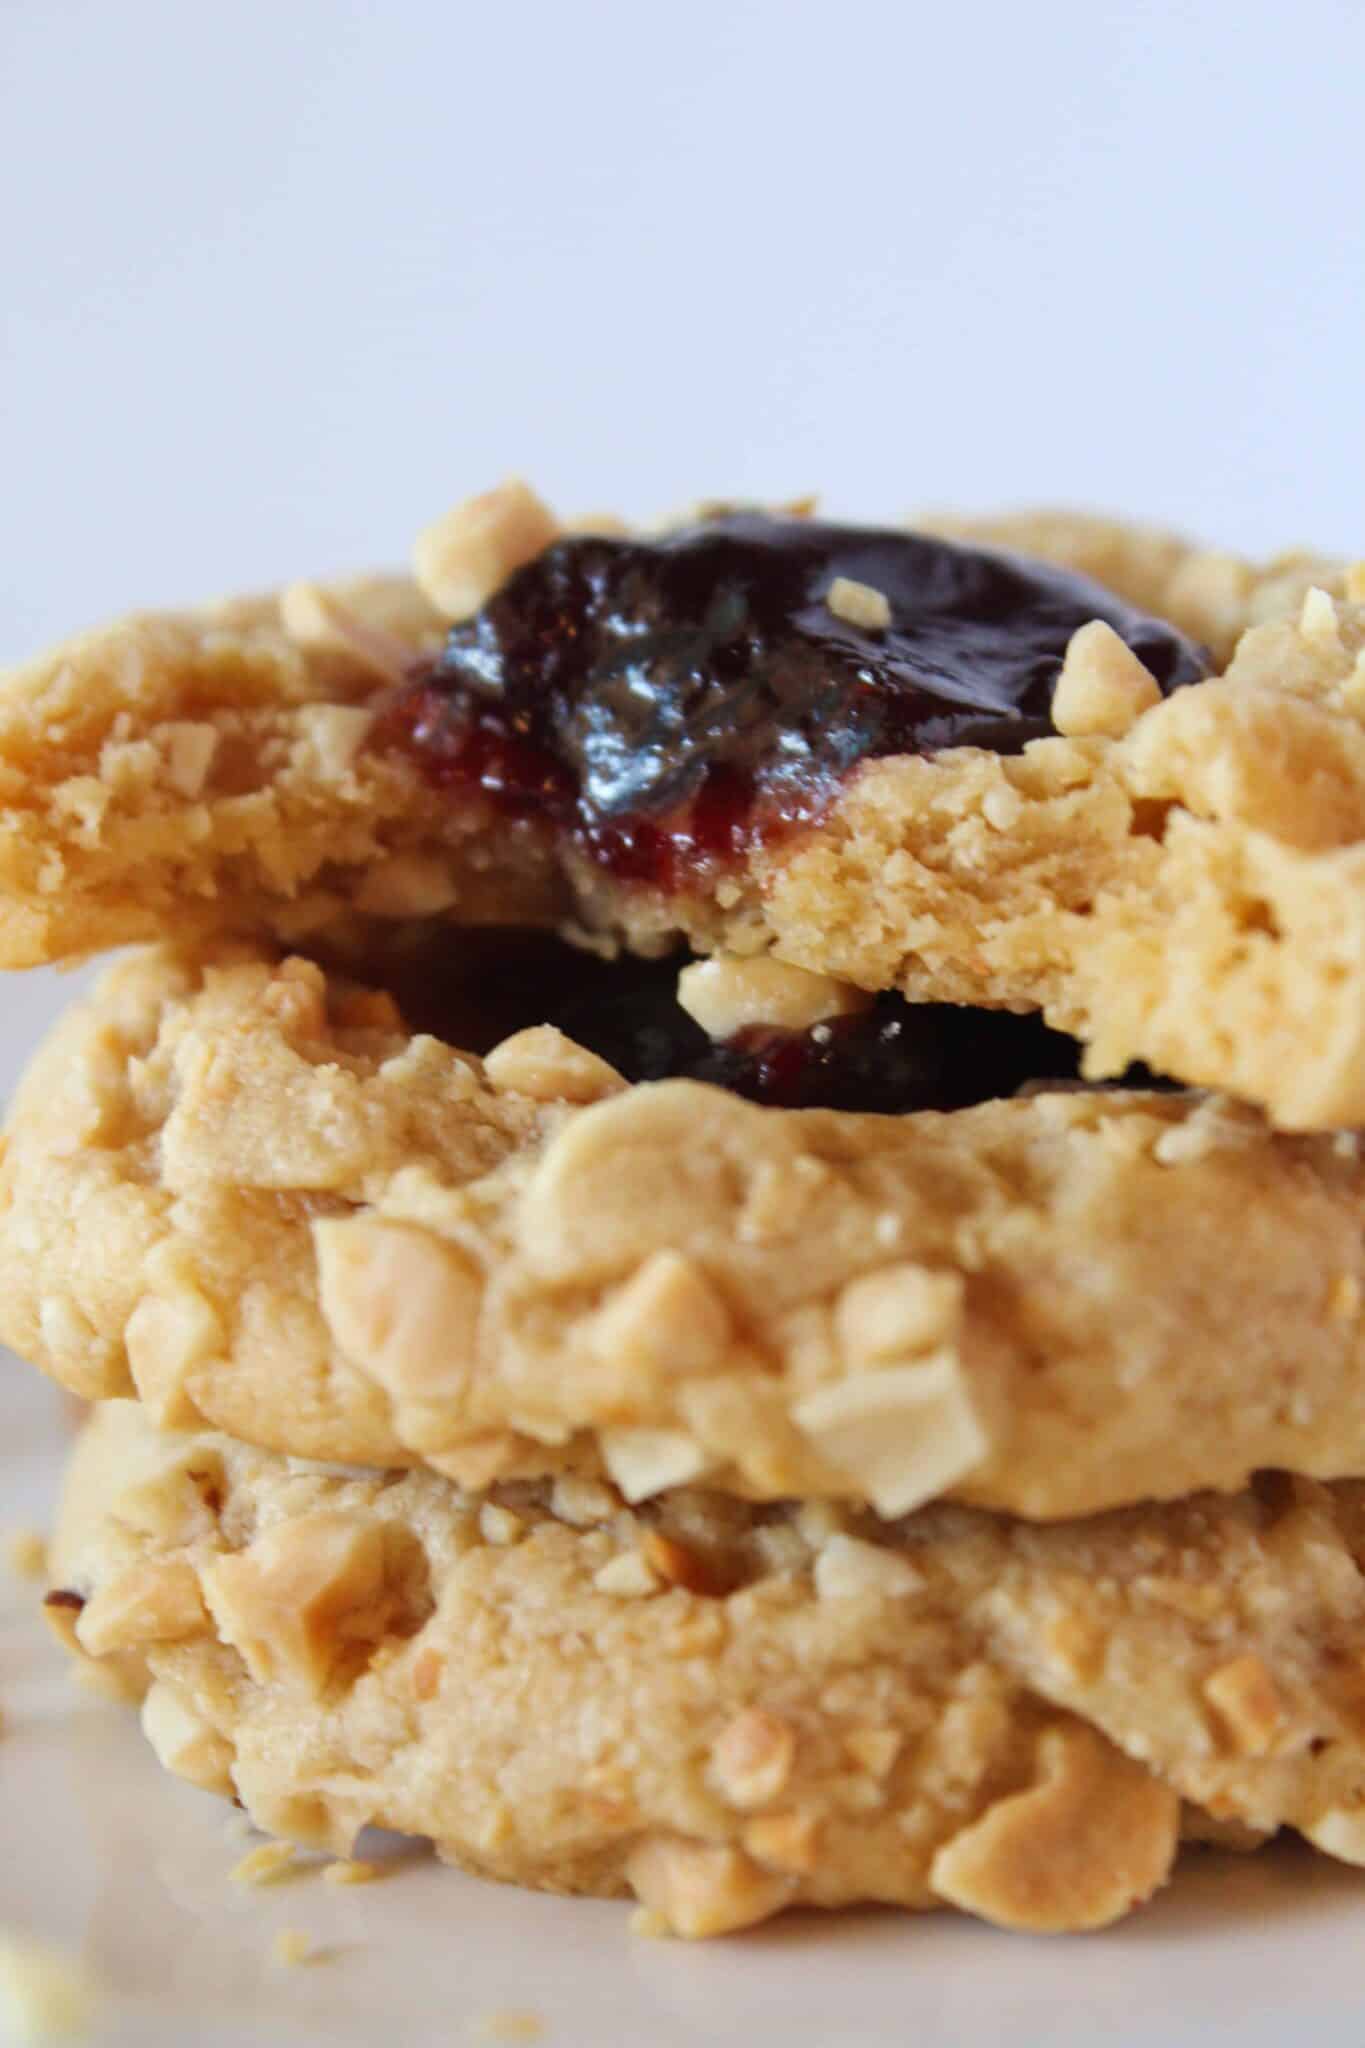 PB & J Cookies Recipe with a cake mix featured by top US cookies blogger, Practically Homemade